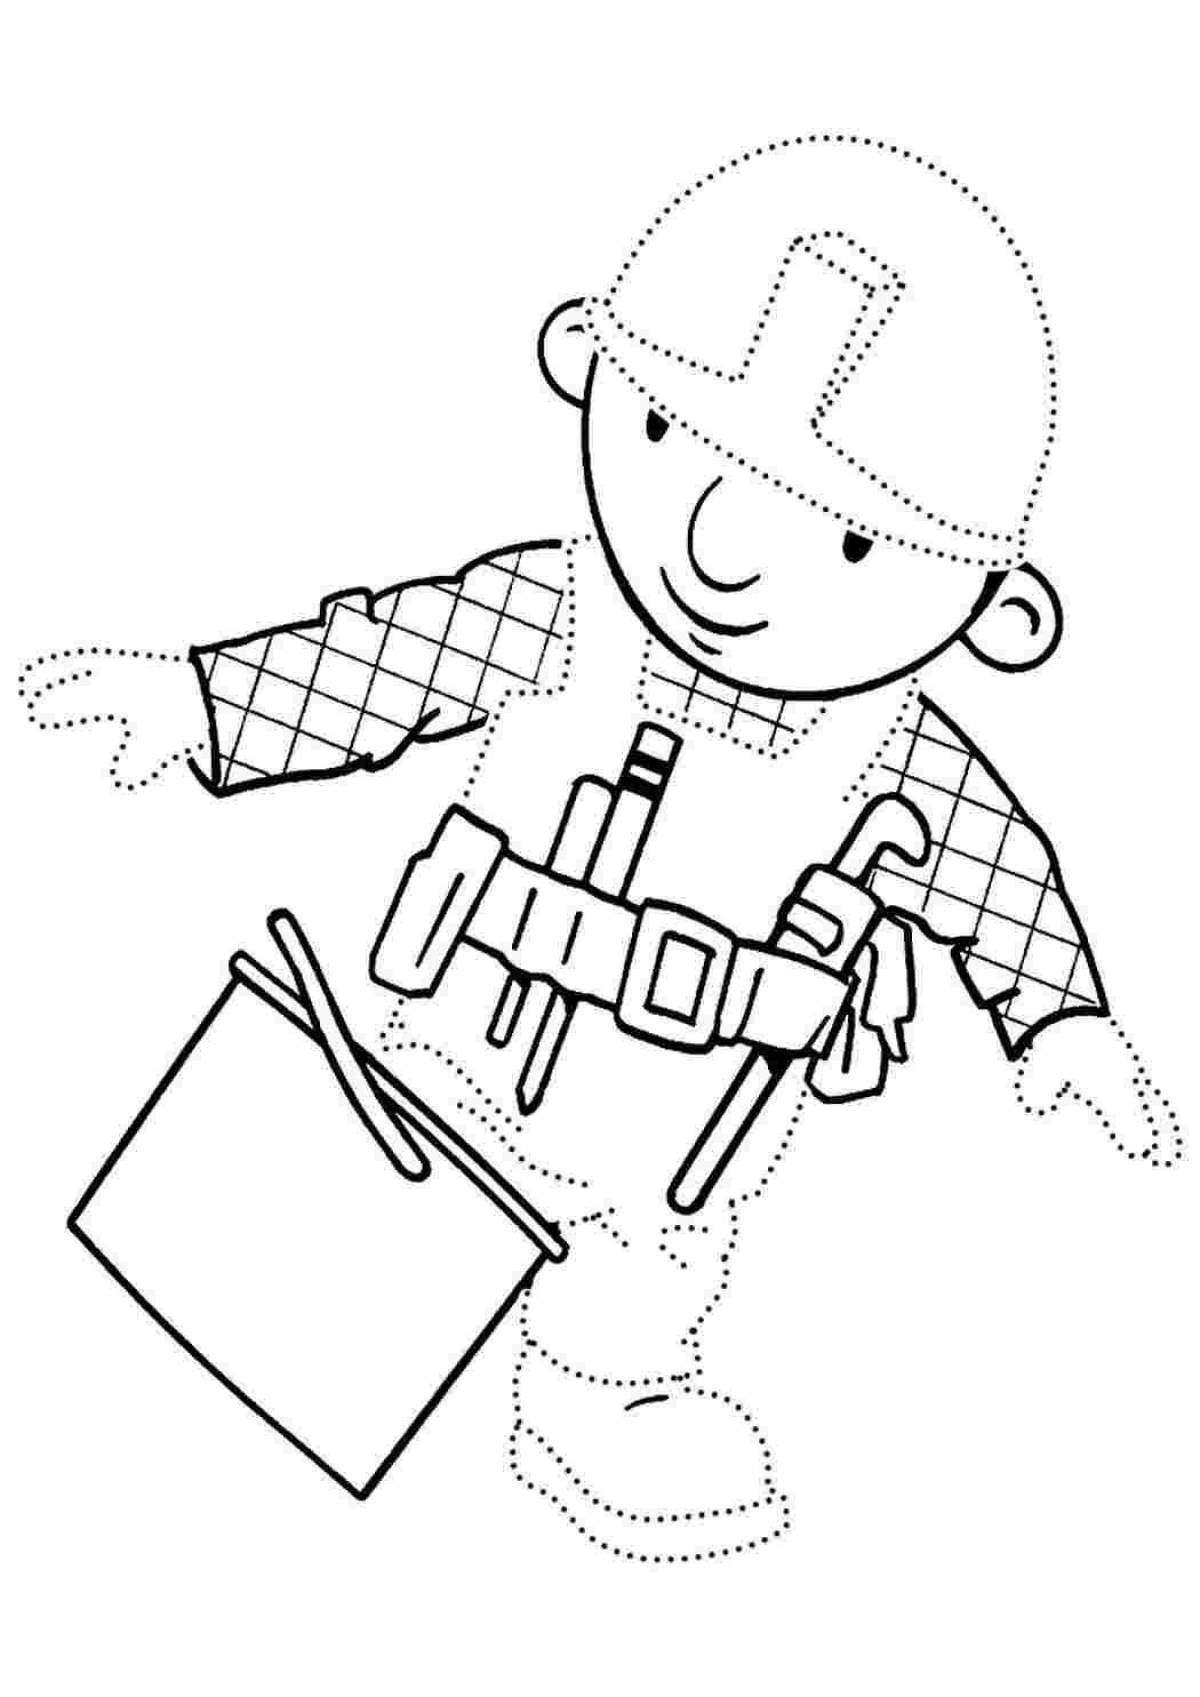 Colorful builders coloring page